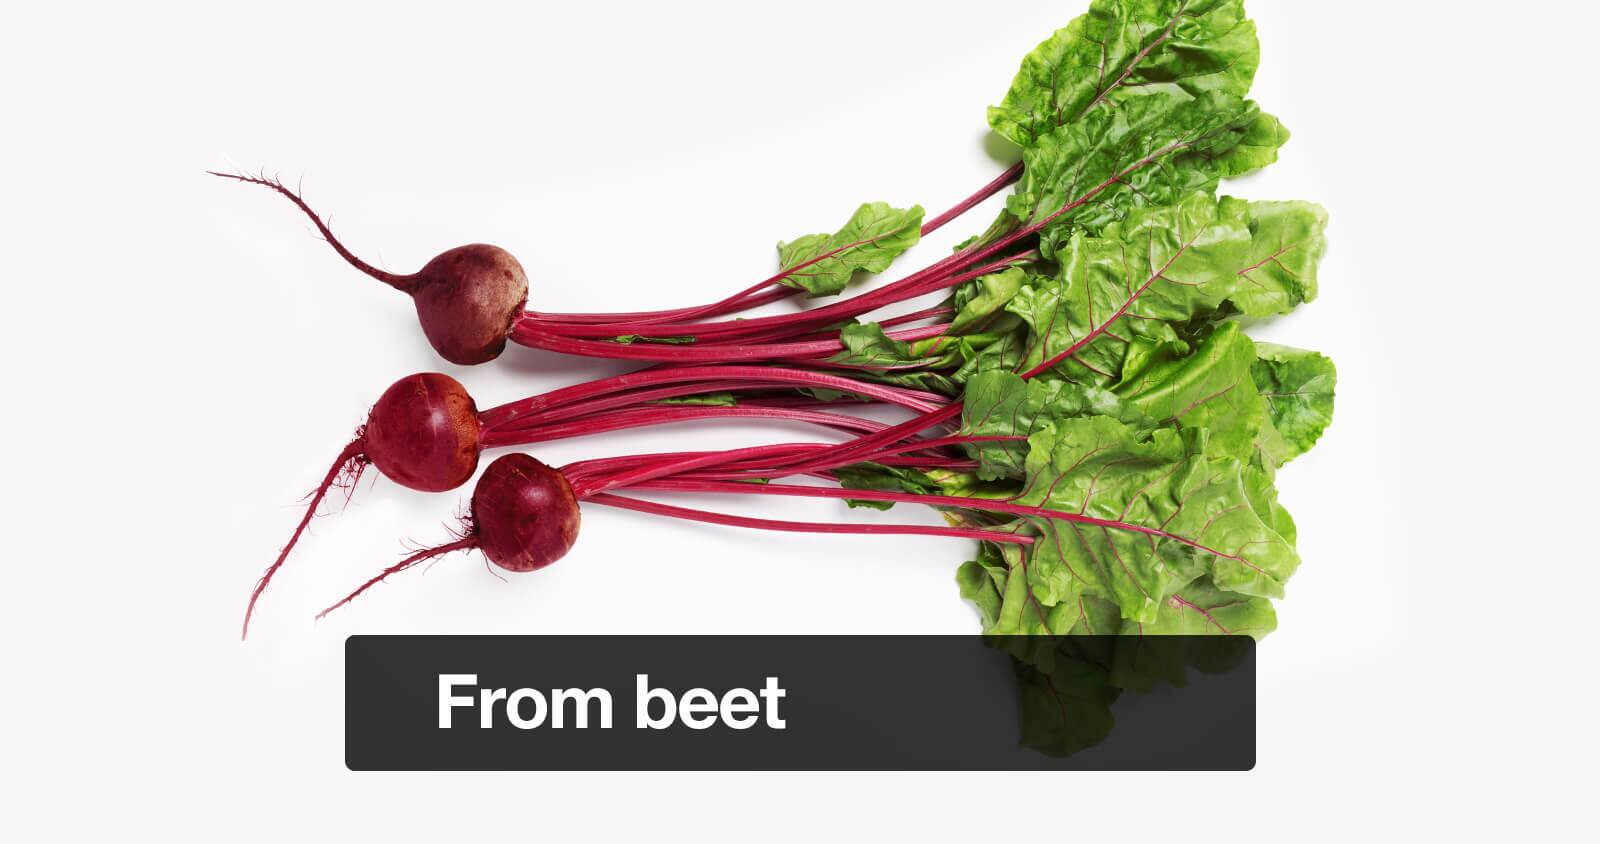 From beet to treat